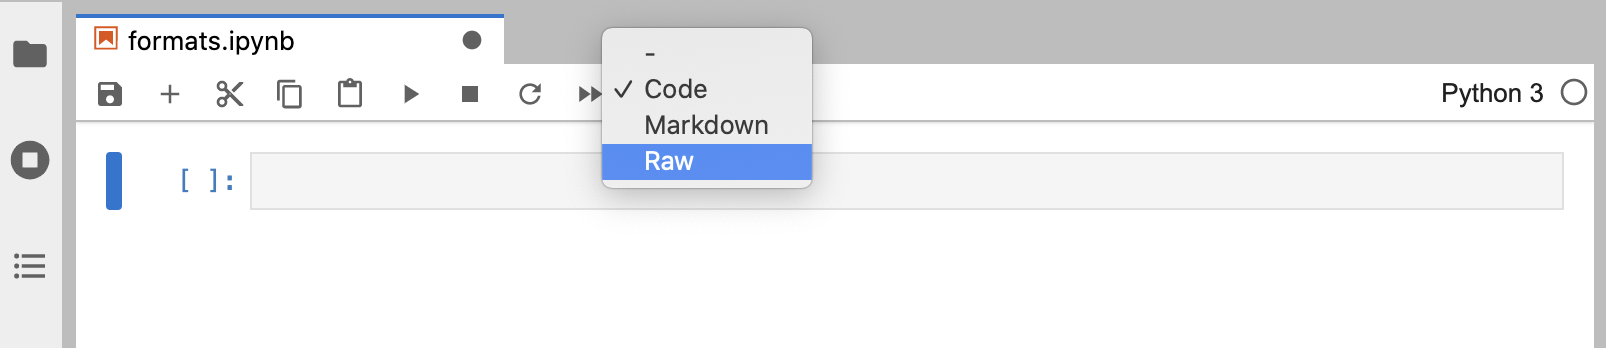 Notebook formats.ipynb with a dropdown shown for a cell with three options: Code, Markdown, and Raw. Raw is highlighted.